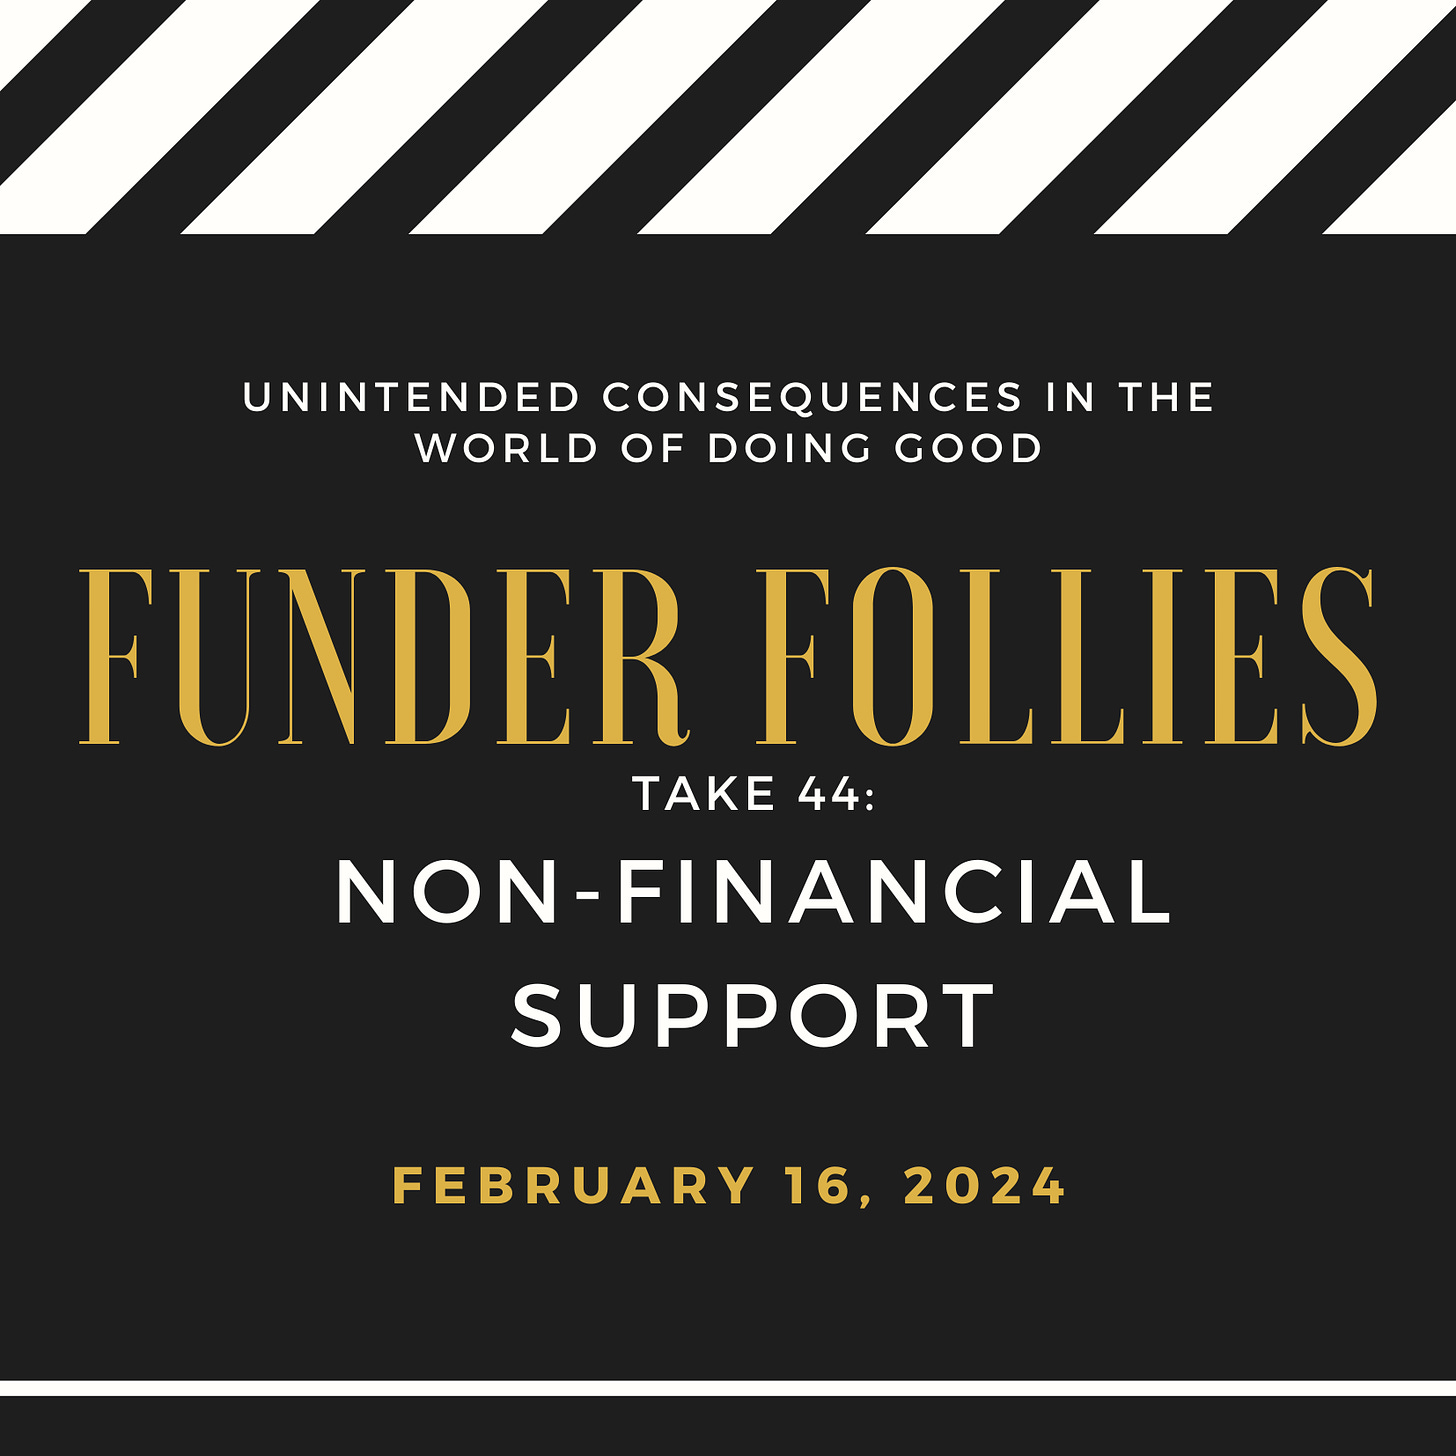 black and white film clapper board showing Funder Follies, Unintended Consequences of Doing Good, Take # 44, nonfinancial support, February 16, 2024